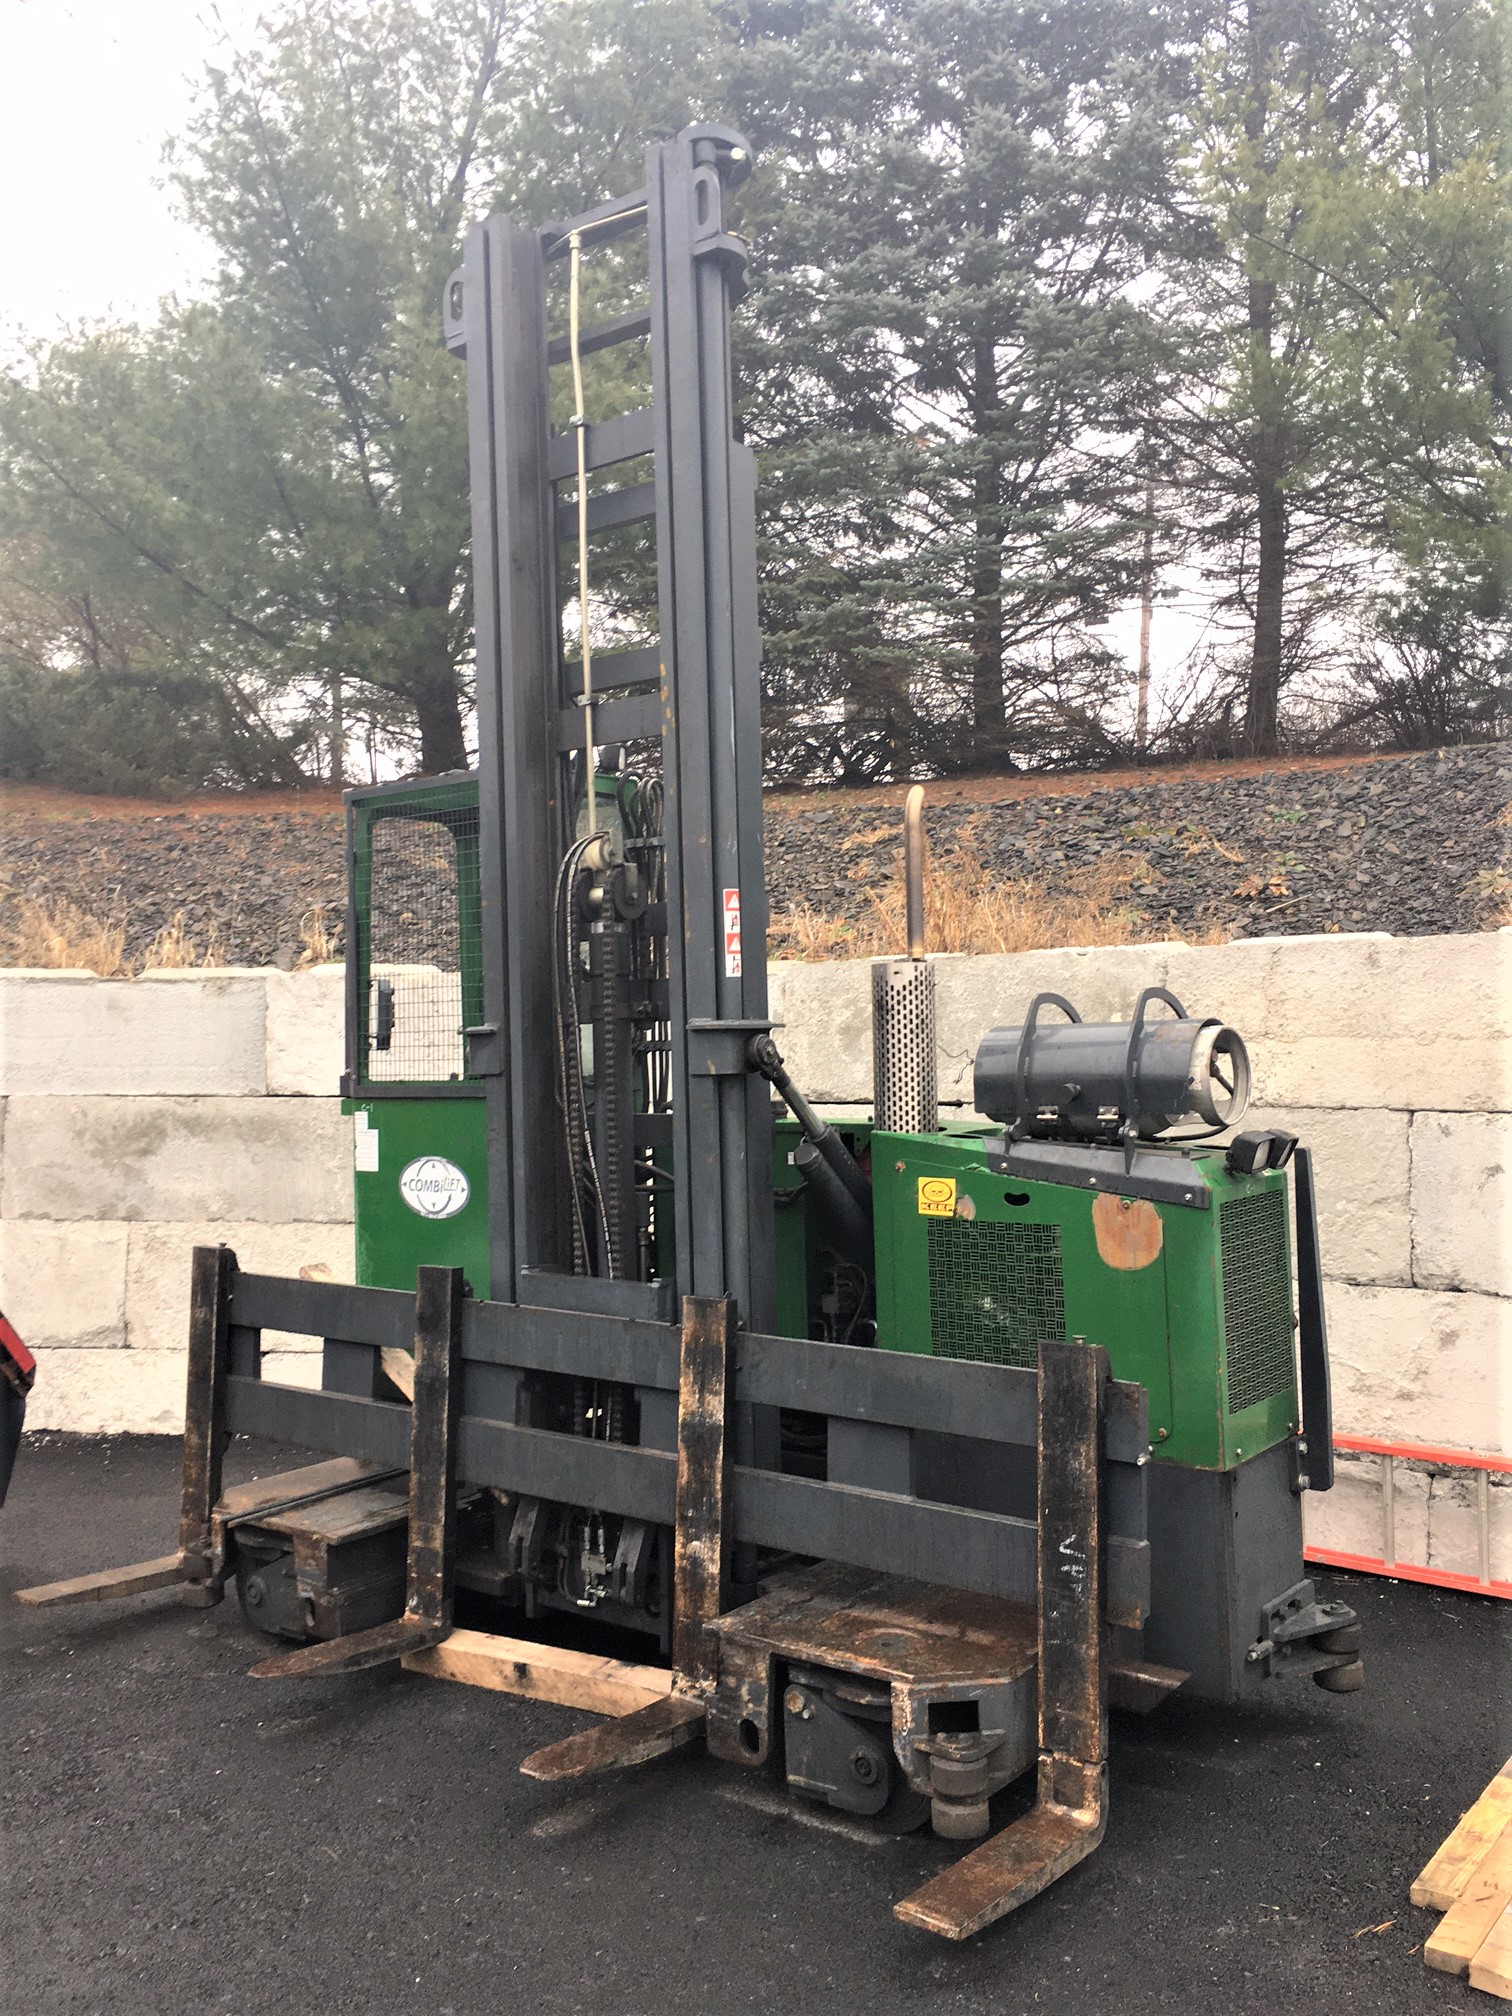 Combilift side loading forklift. 2012 model C10000GT Bi Directional forklift with 2561 hours. 10'000 lb. lift capacity. For wheel drive side loader forklift. LPG engine with 159 inch two stage mast, 154 inch wide carriage and 4 forks. 18'200 lb. unladen weight.